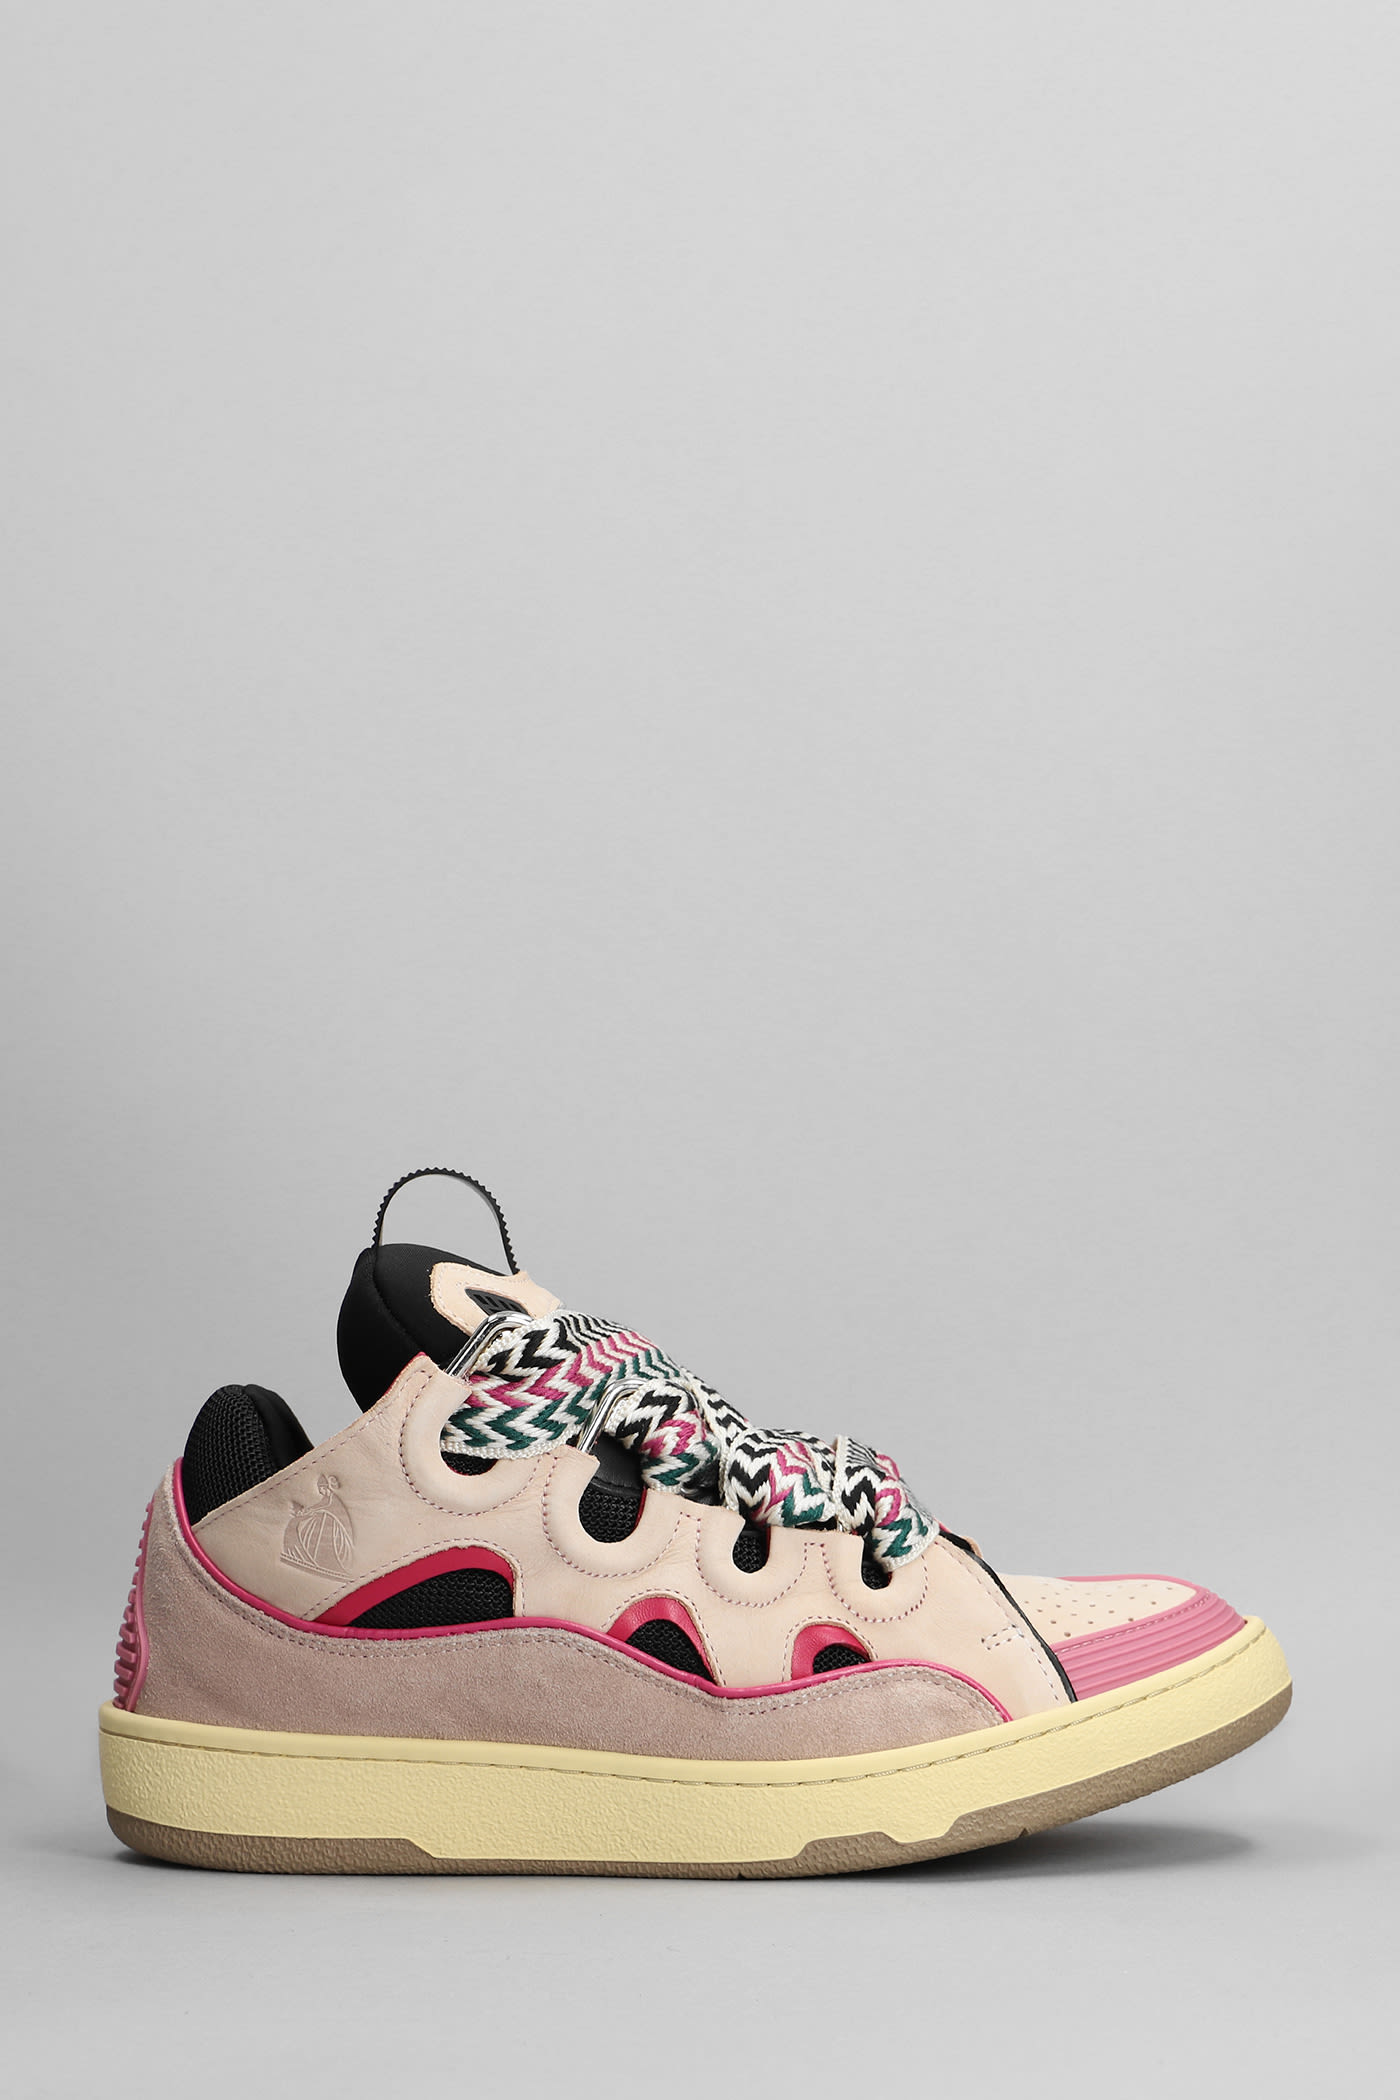 Lanvin Curb Sneakers In Rose-pink Suede And Leather